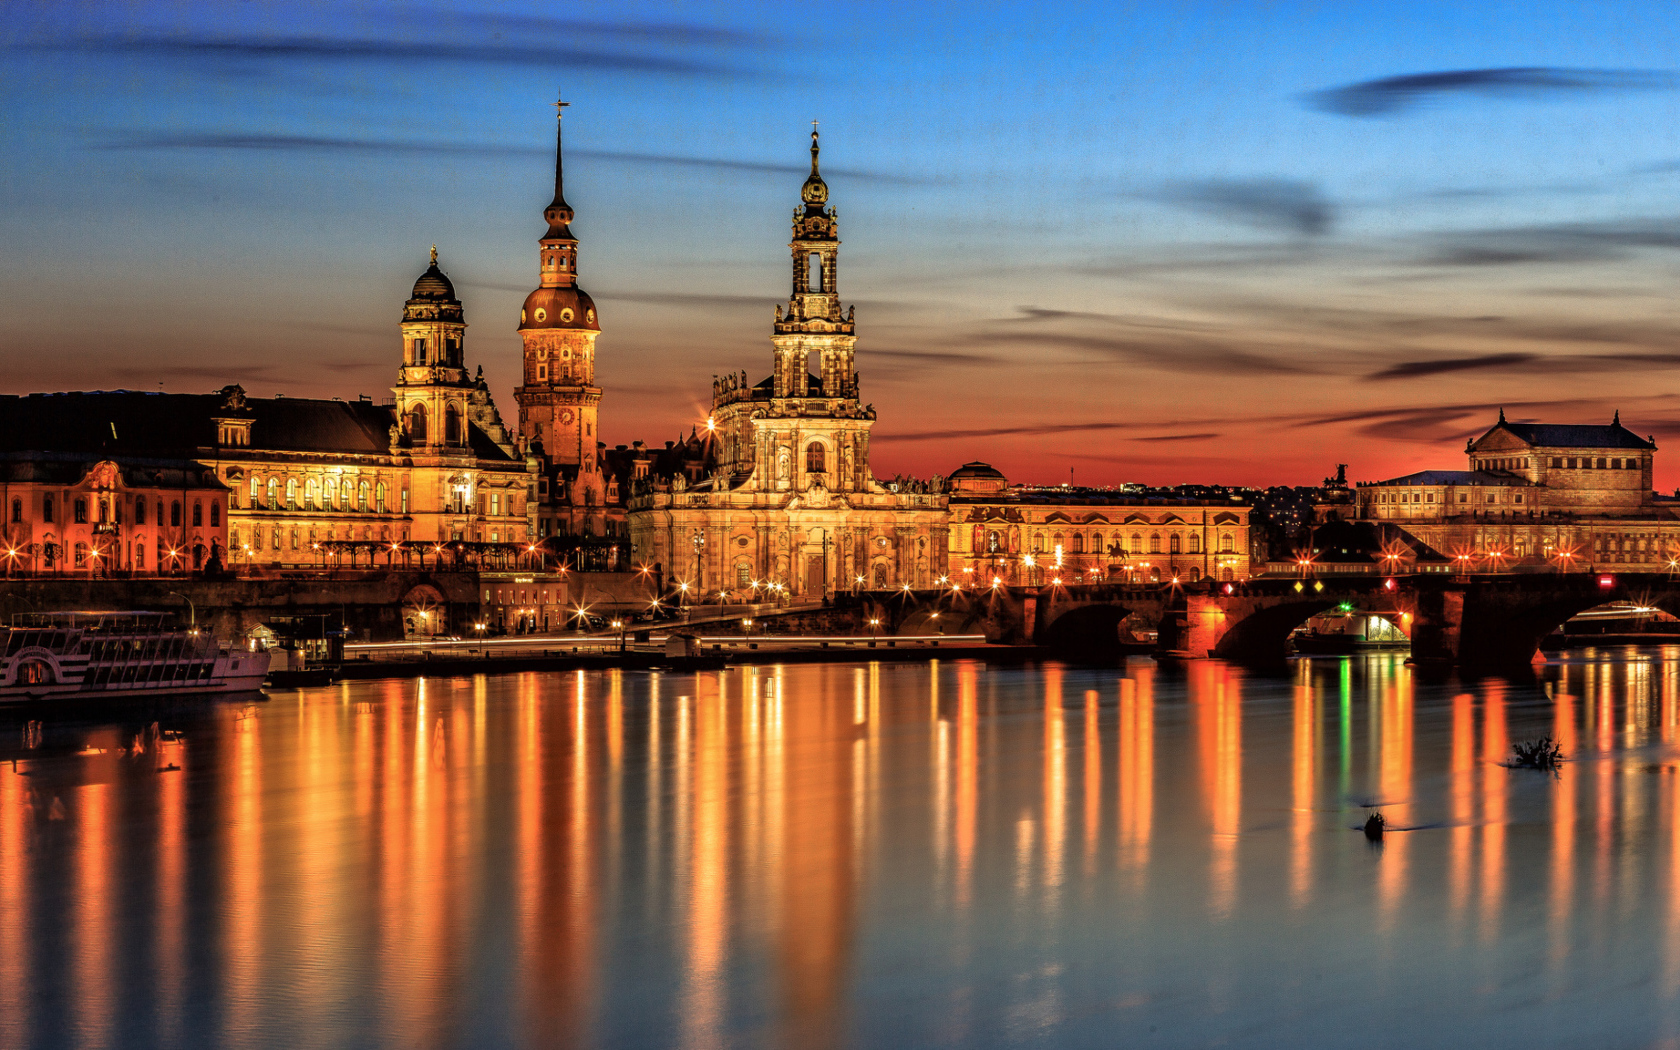 Hofkirche Cathedral in the evening, Dresden. Germany